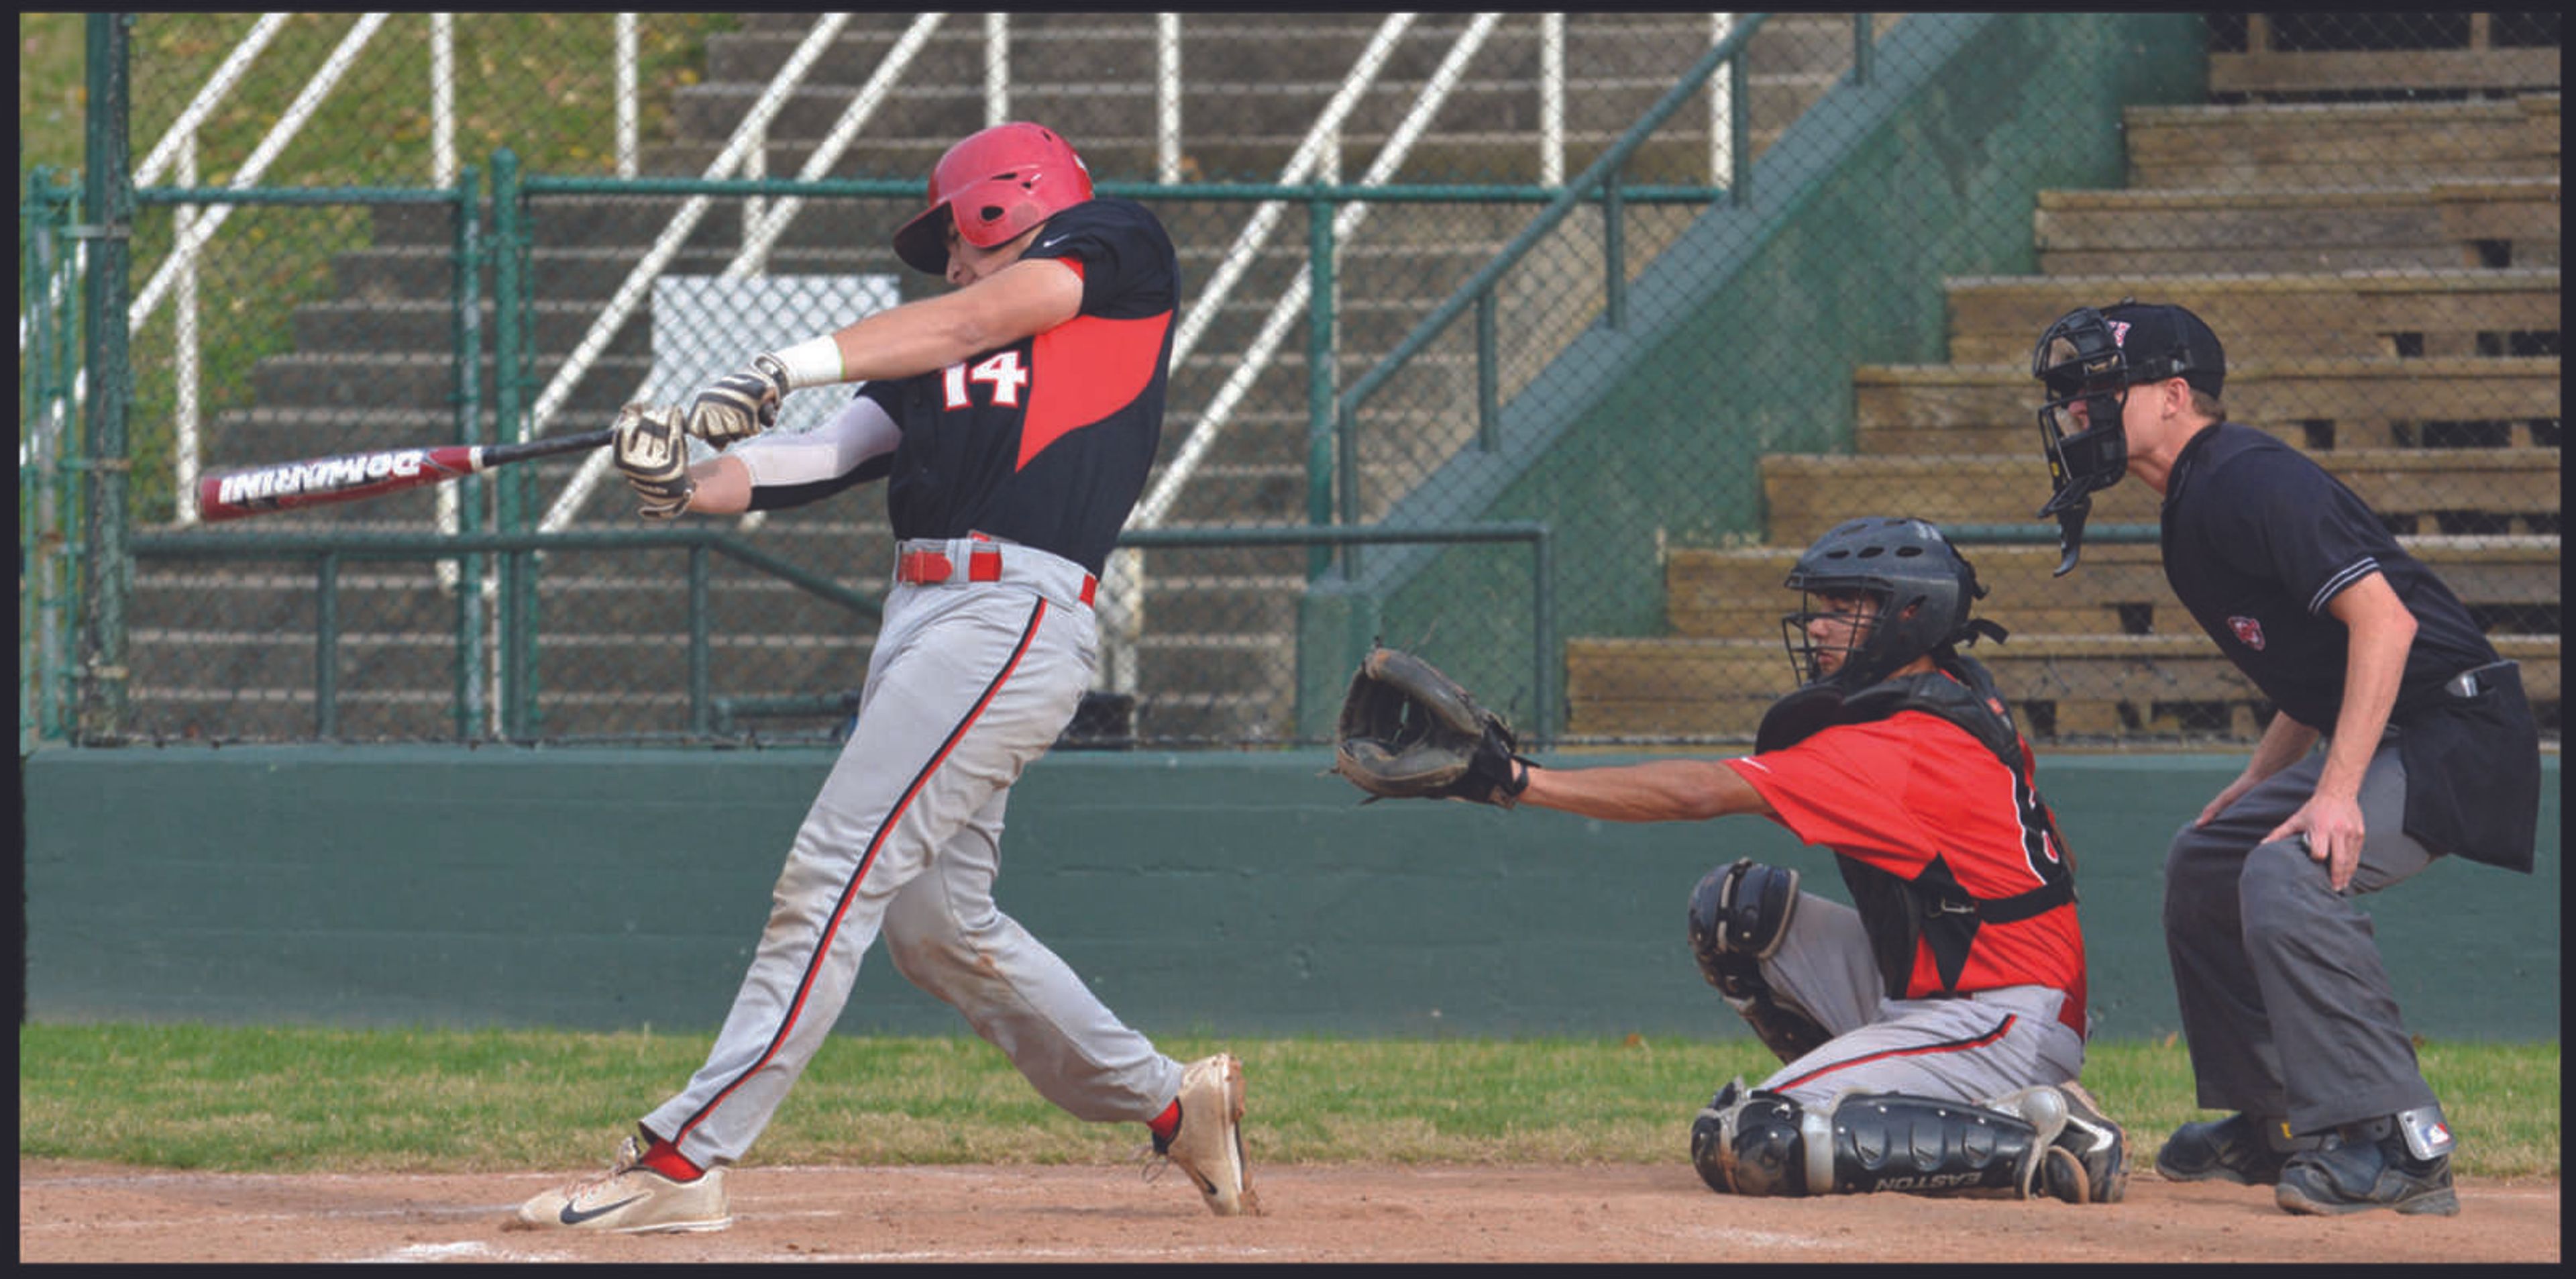 Red and Black Series helps the baseball team accomplish goals and prepare for spring season